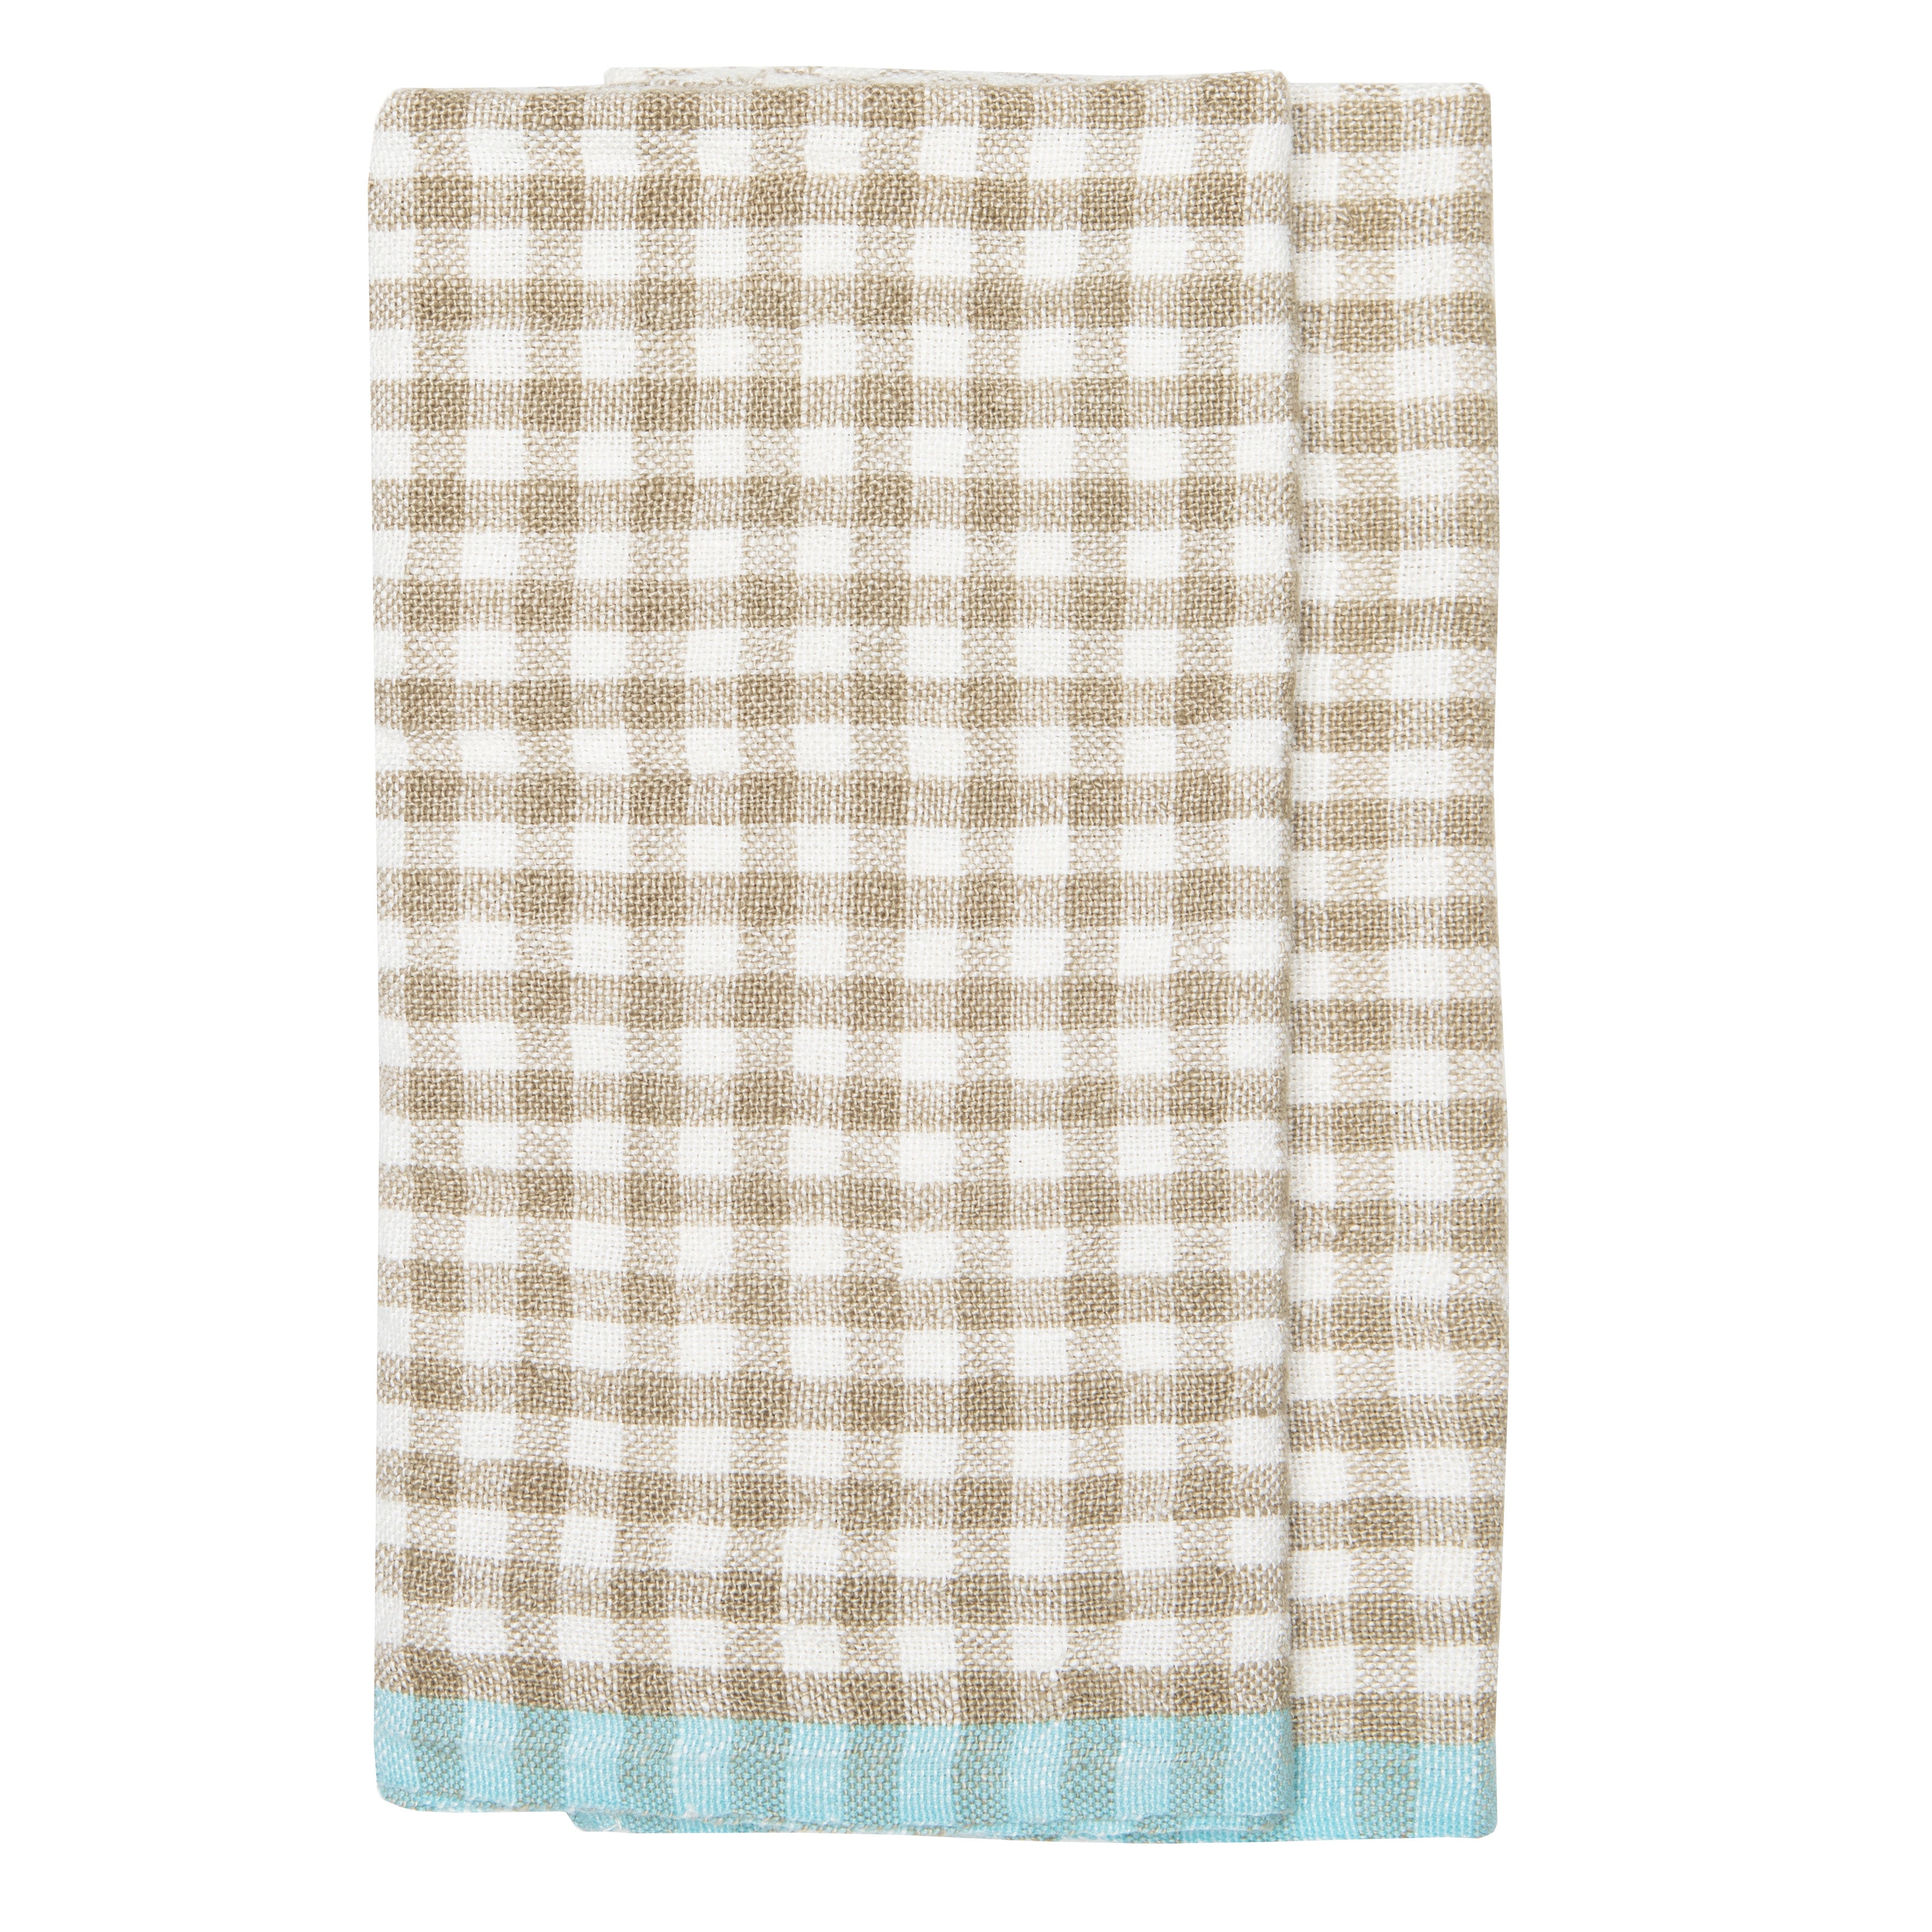 Japanese Linen Kitchen Towel, Navy and White Check